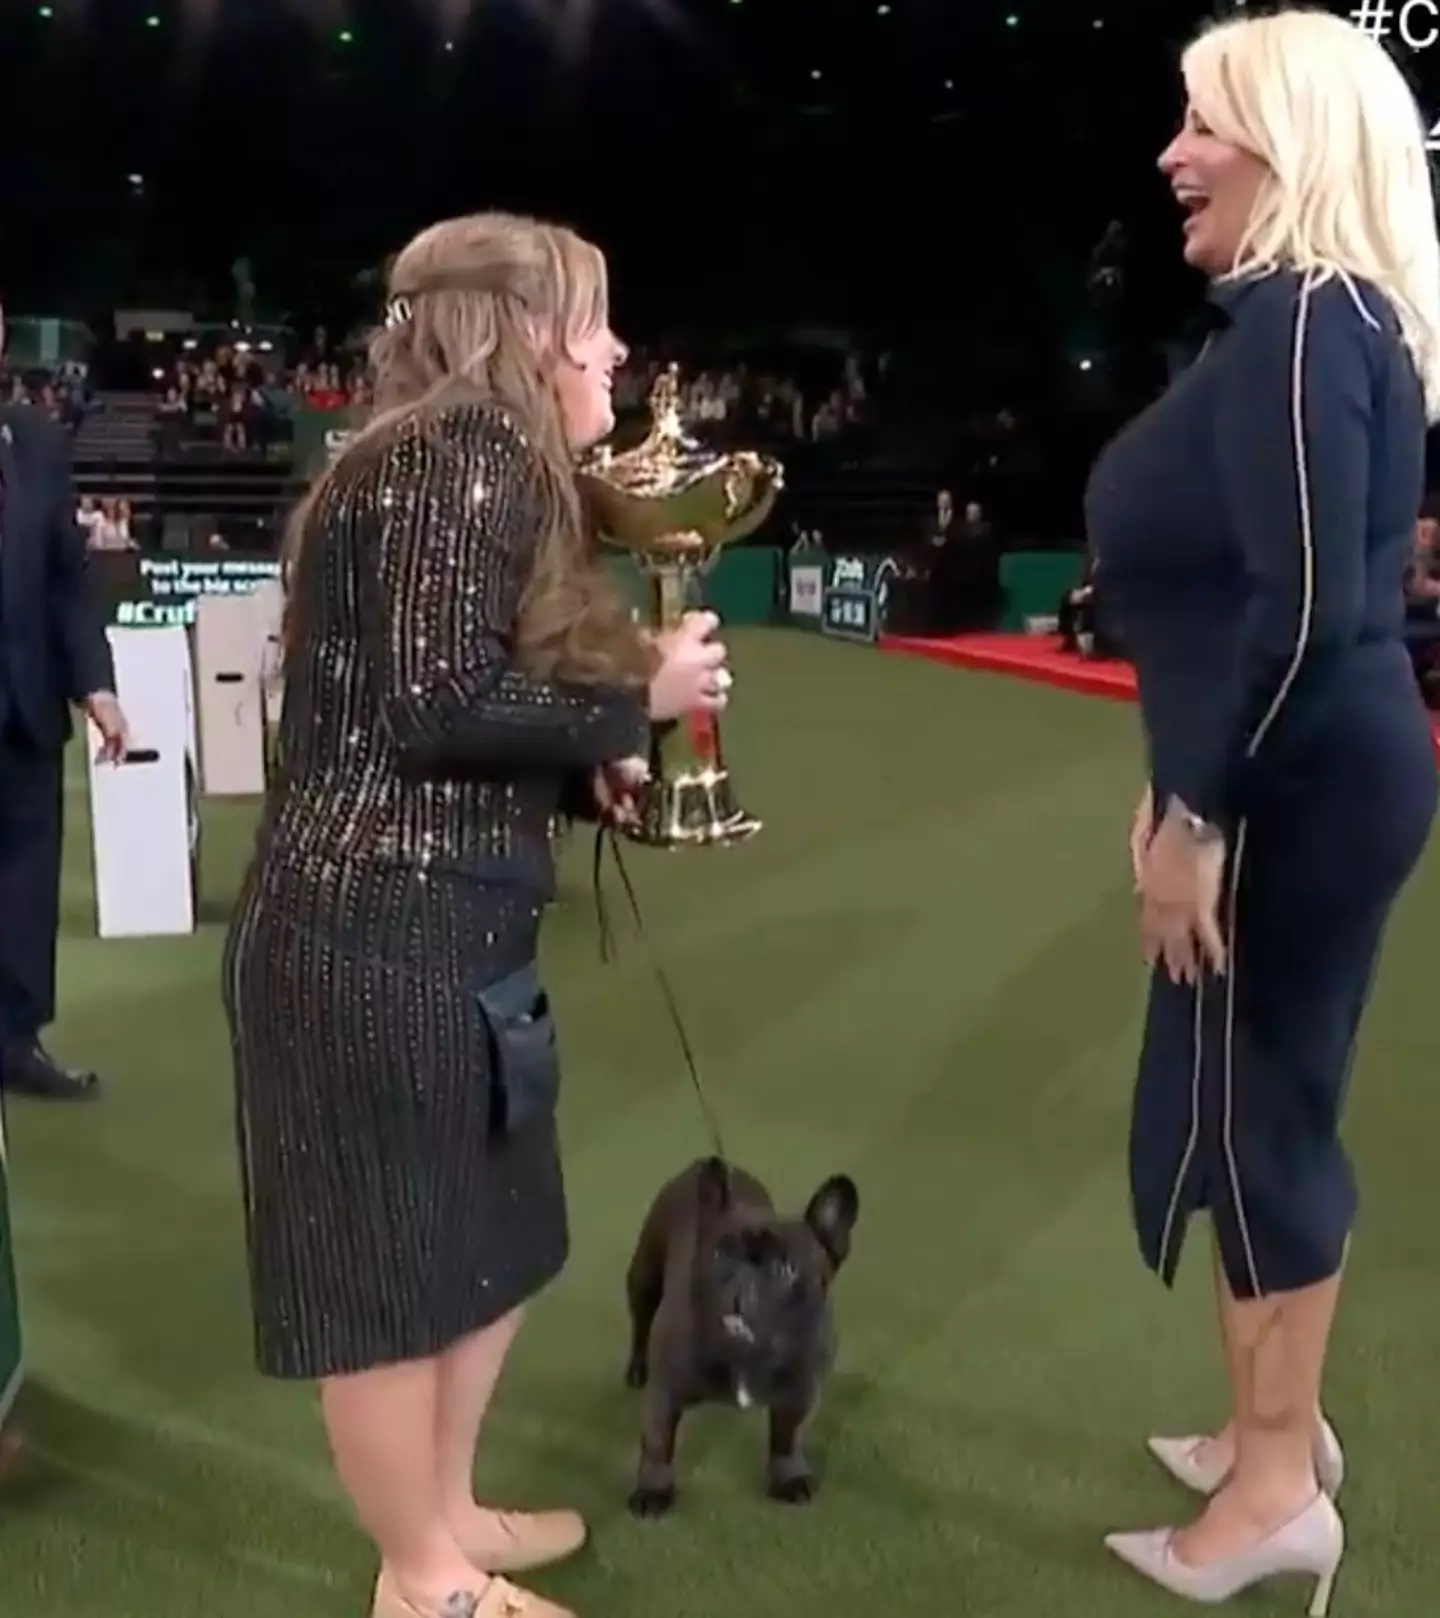 People aren't happy that French Bulldog Elton scooped up a series of awards.